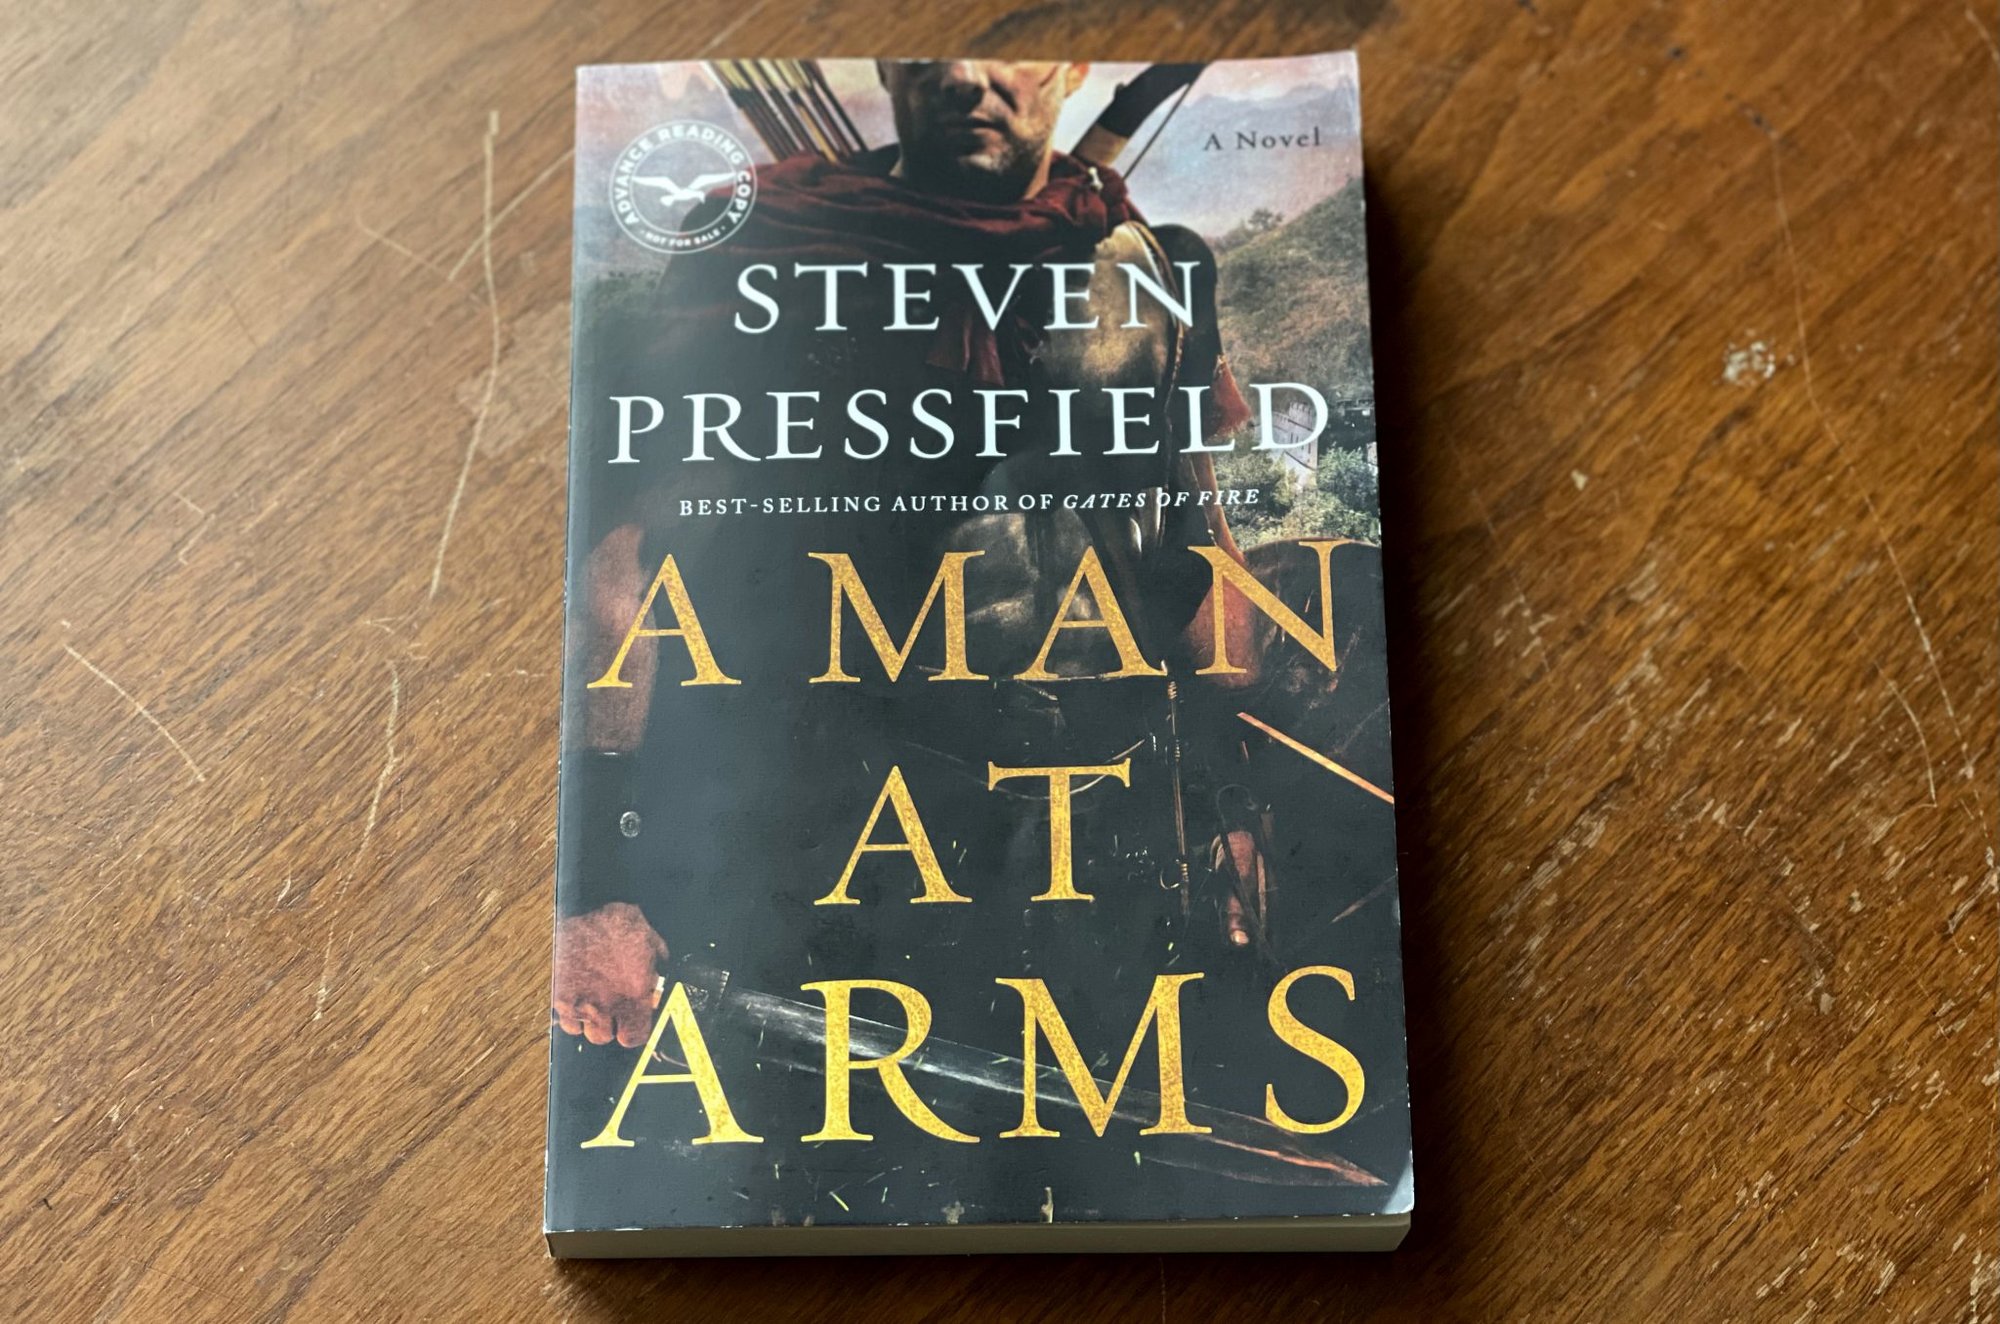 Steven Pressfield, A Man at Arms